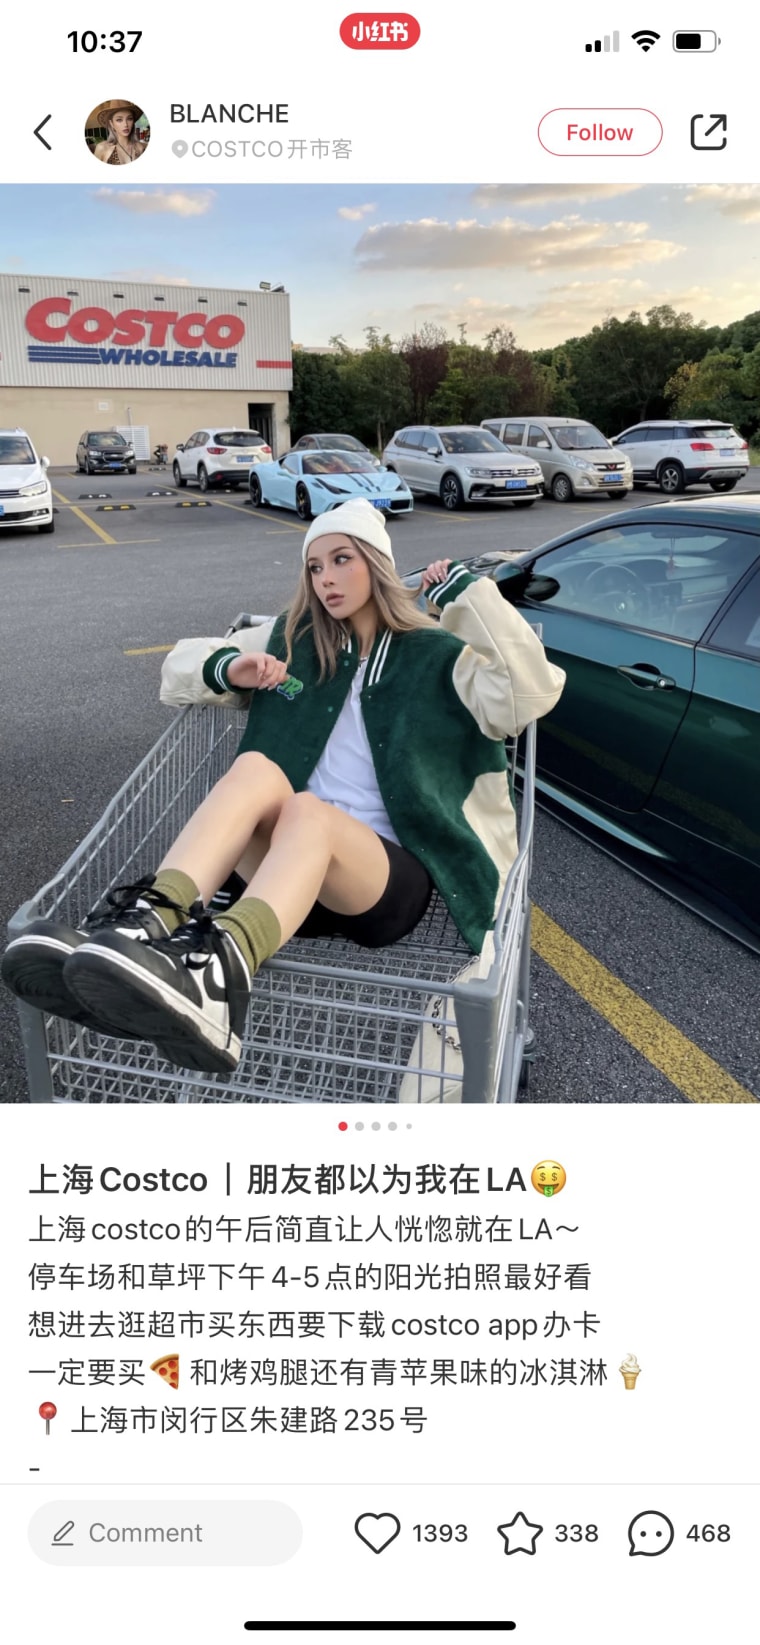 "In the afternoon, Shanghai's Costco really makes you feel like you're in L.A.," a portion of this social media post said.